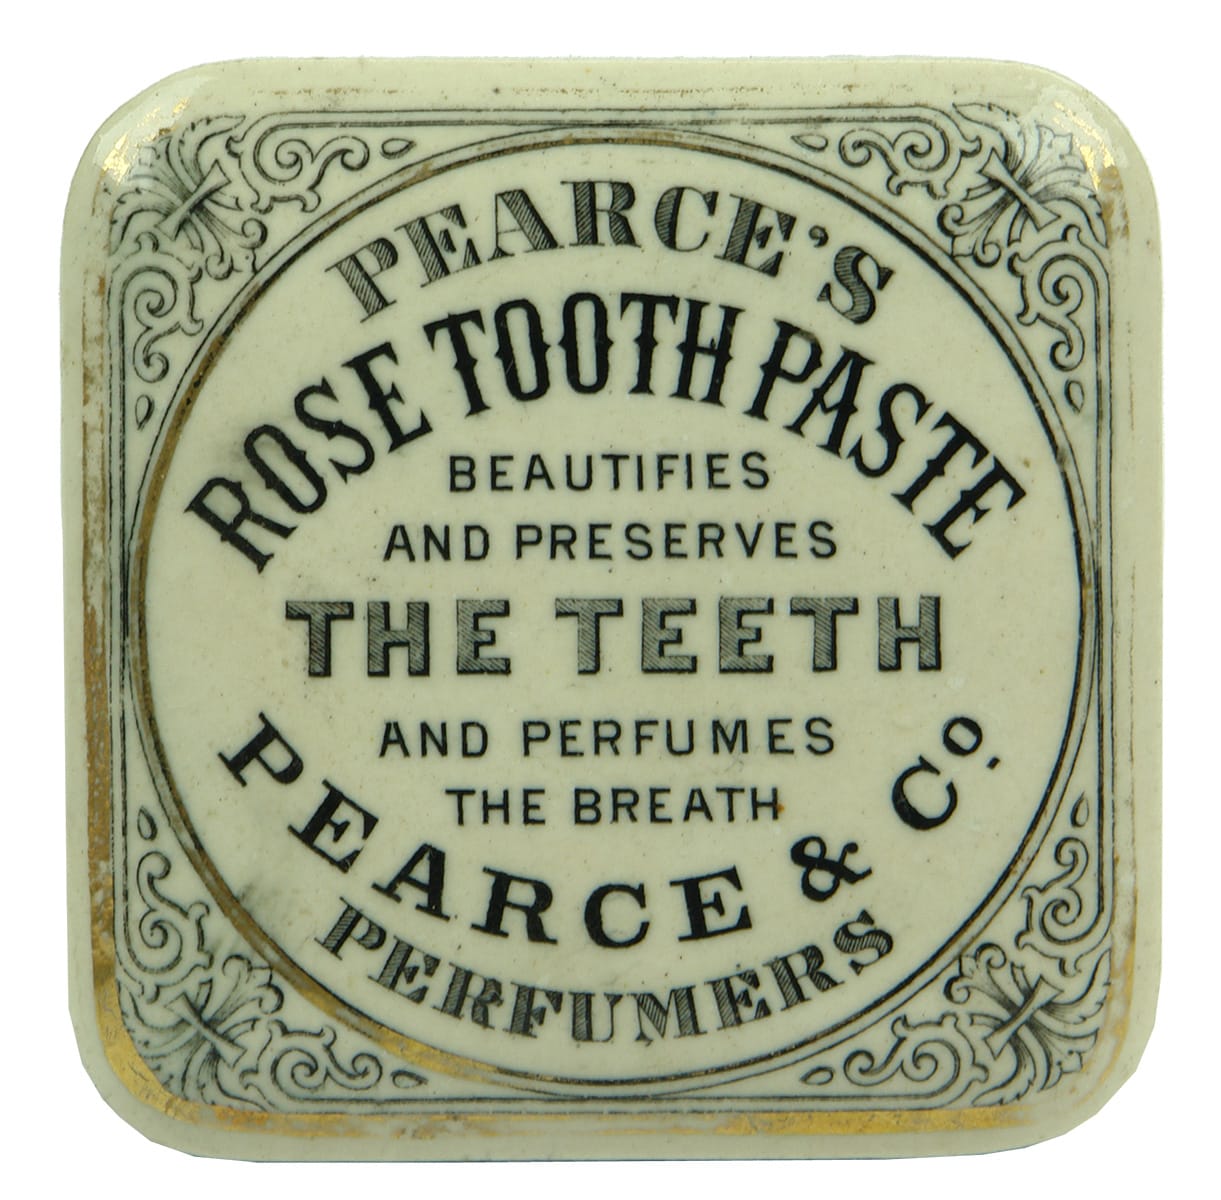 Pearce's Rose Tooth Paste Perfumers Pot Lid